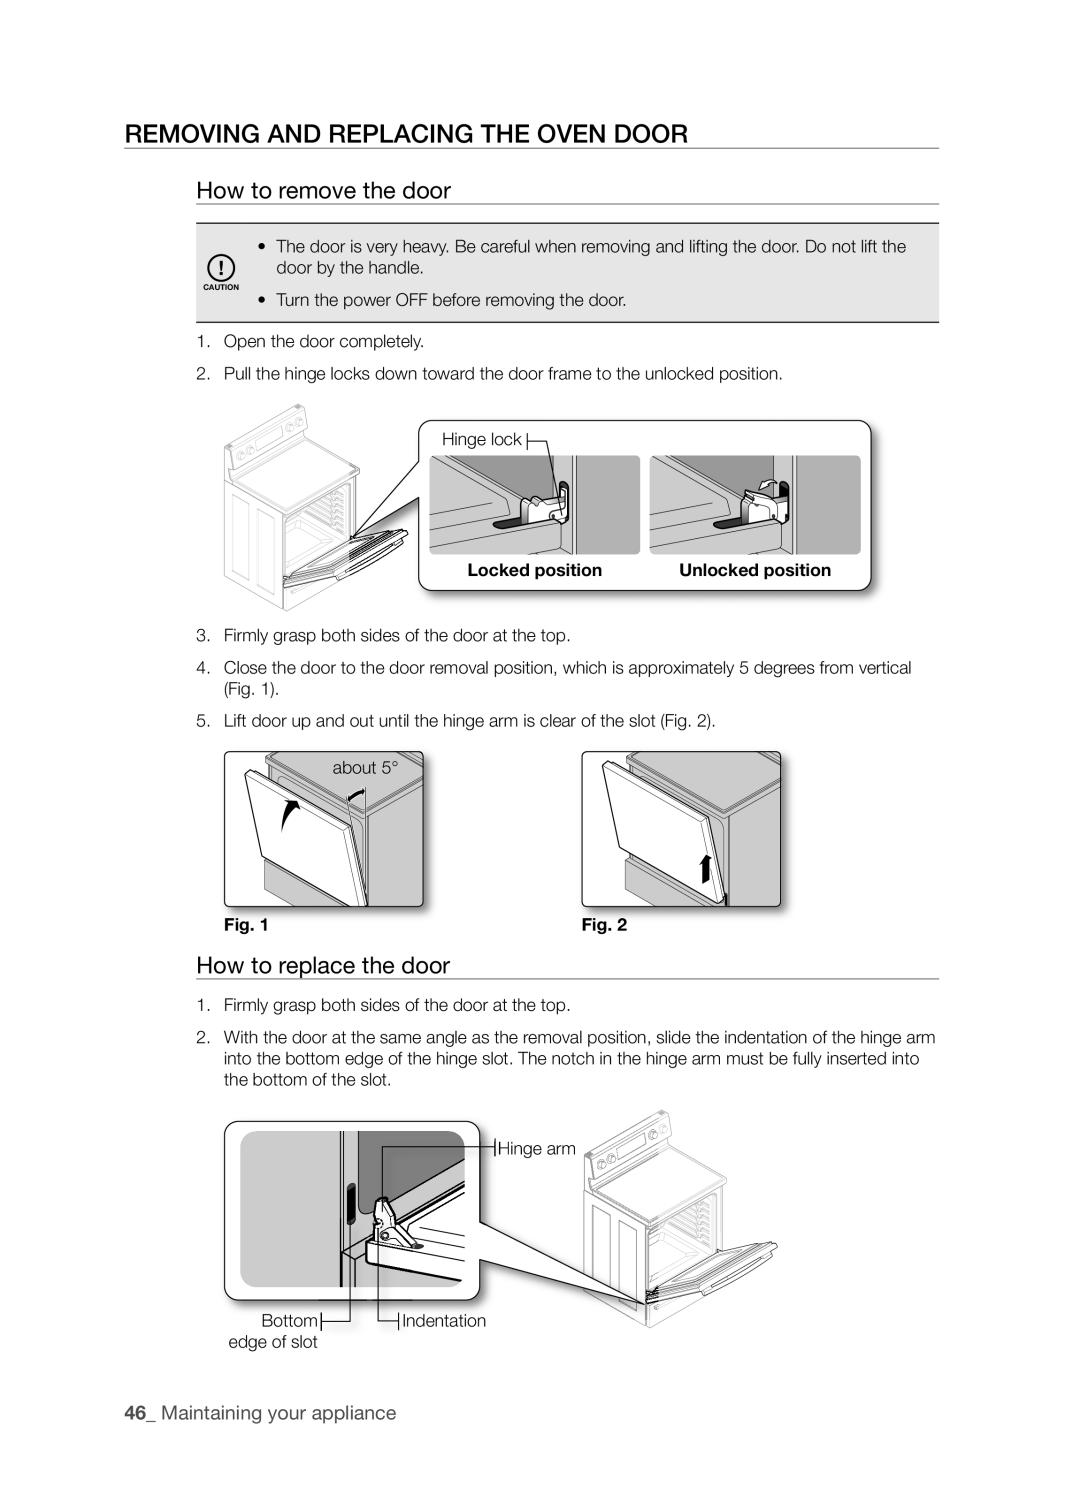 Samsung FTQ386LWUX user manual Removing And Replacing The Oven Door, How to remove the door, How to replace the door 